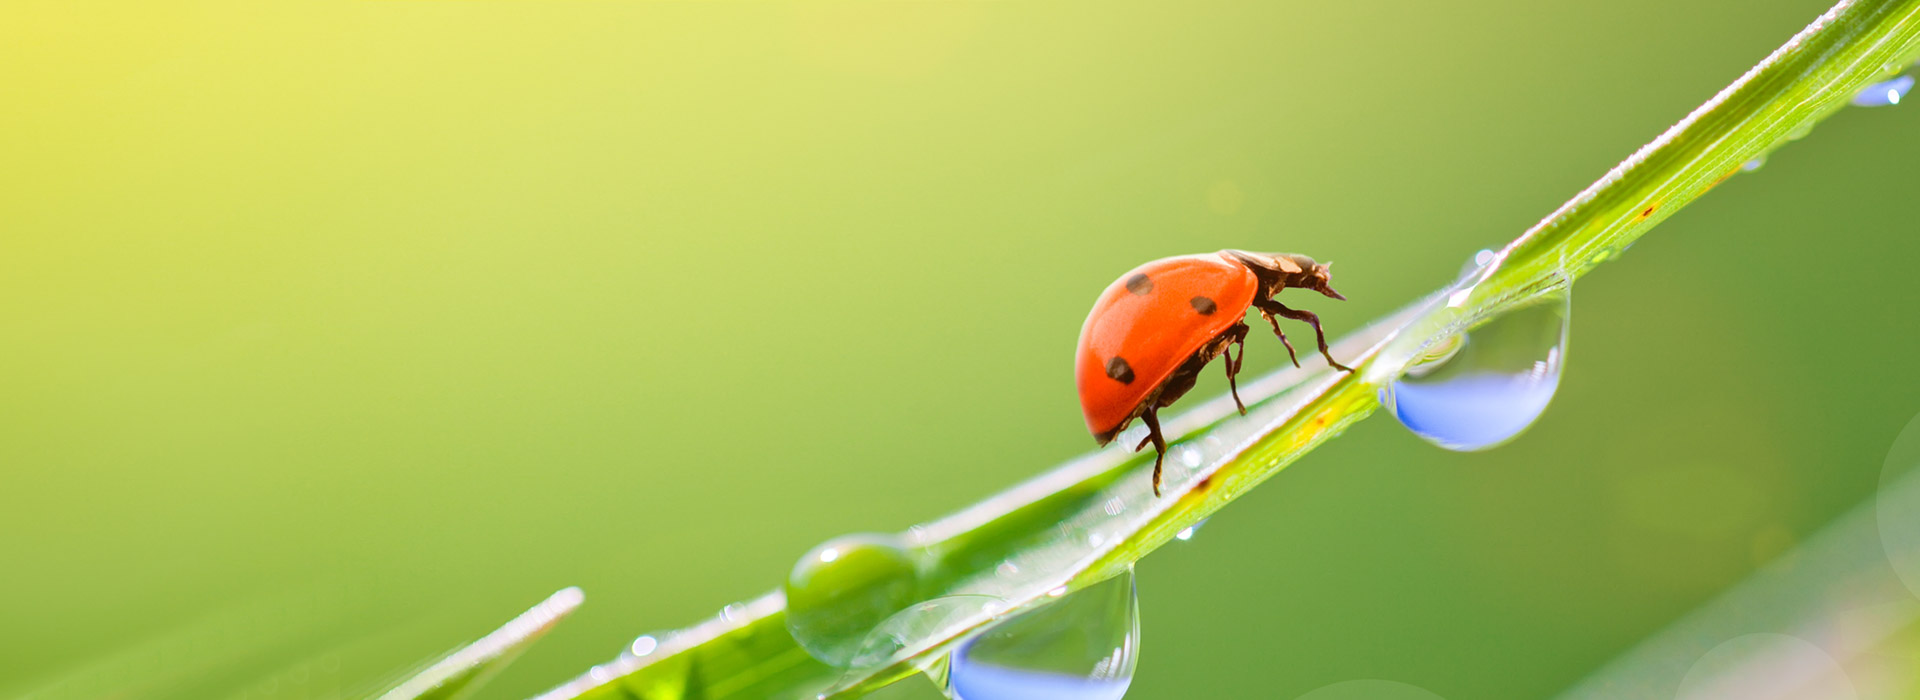 ladybird on a blade of grass with drops of water